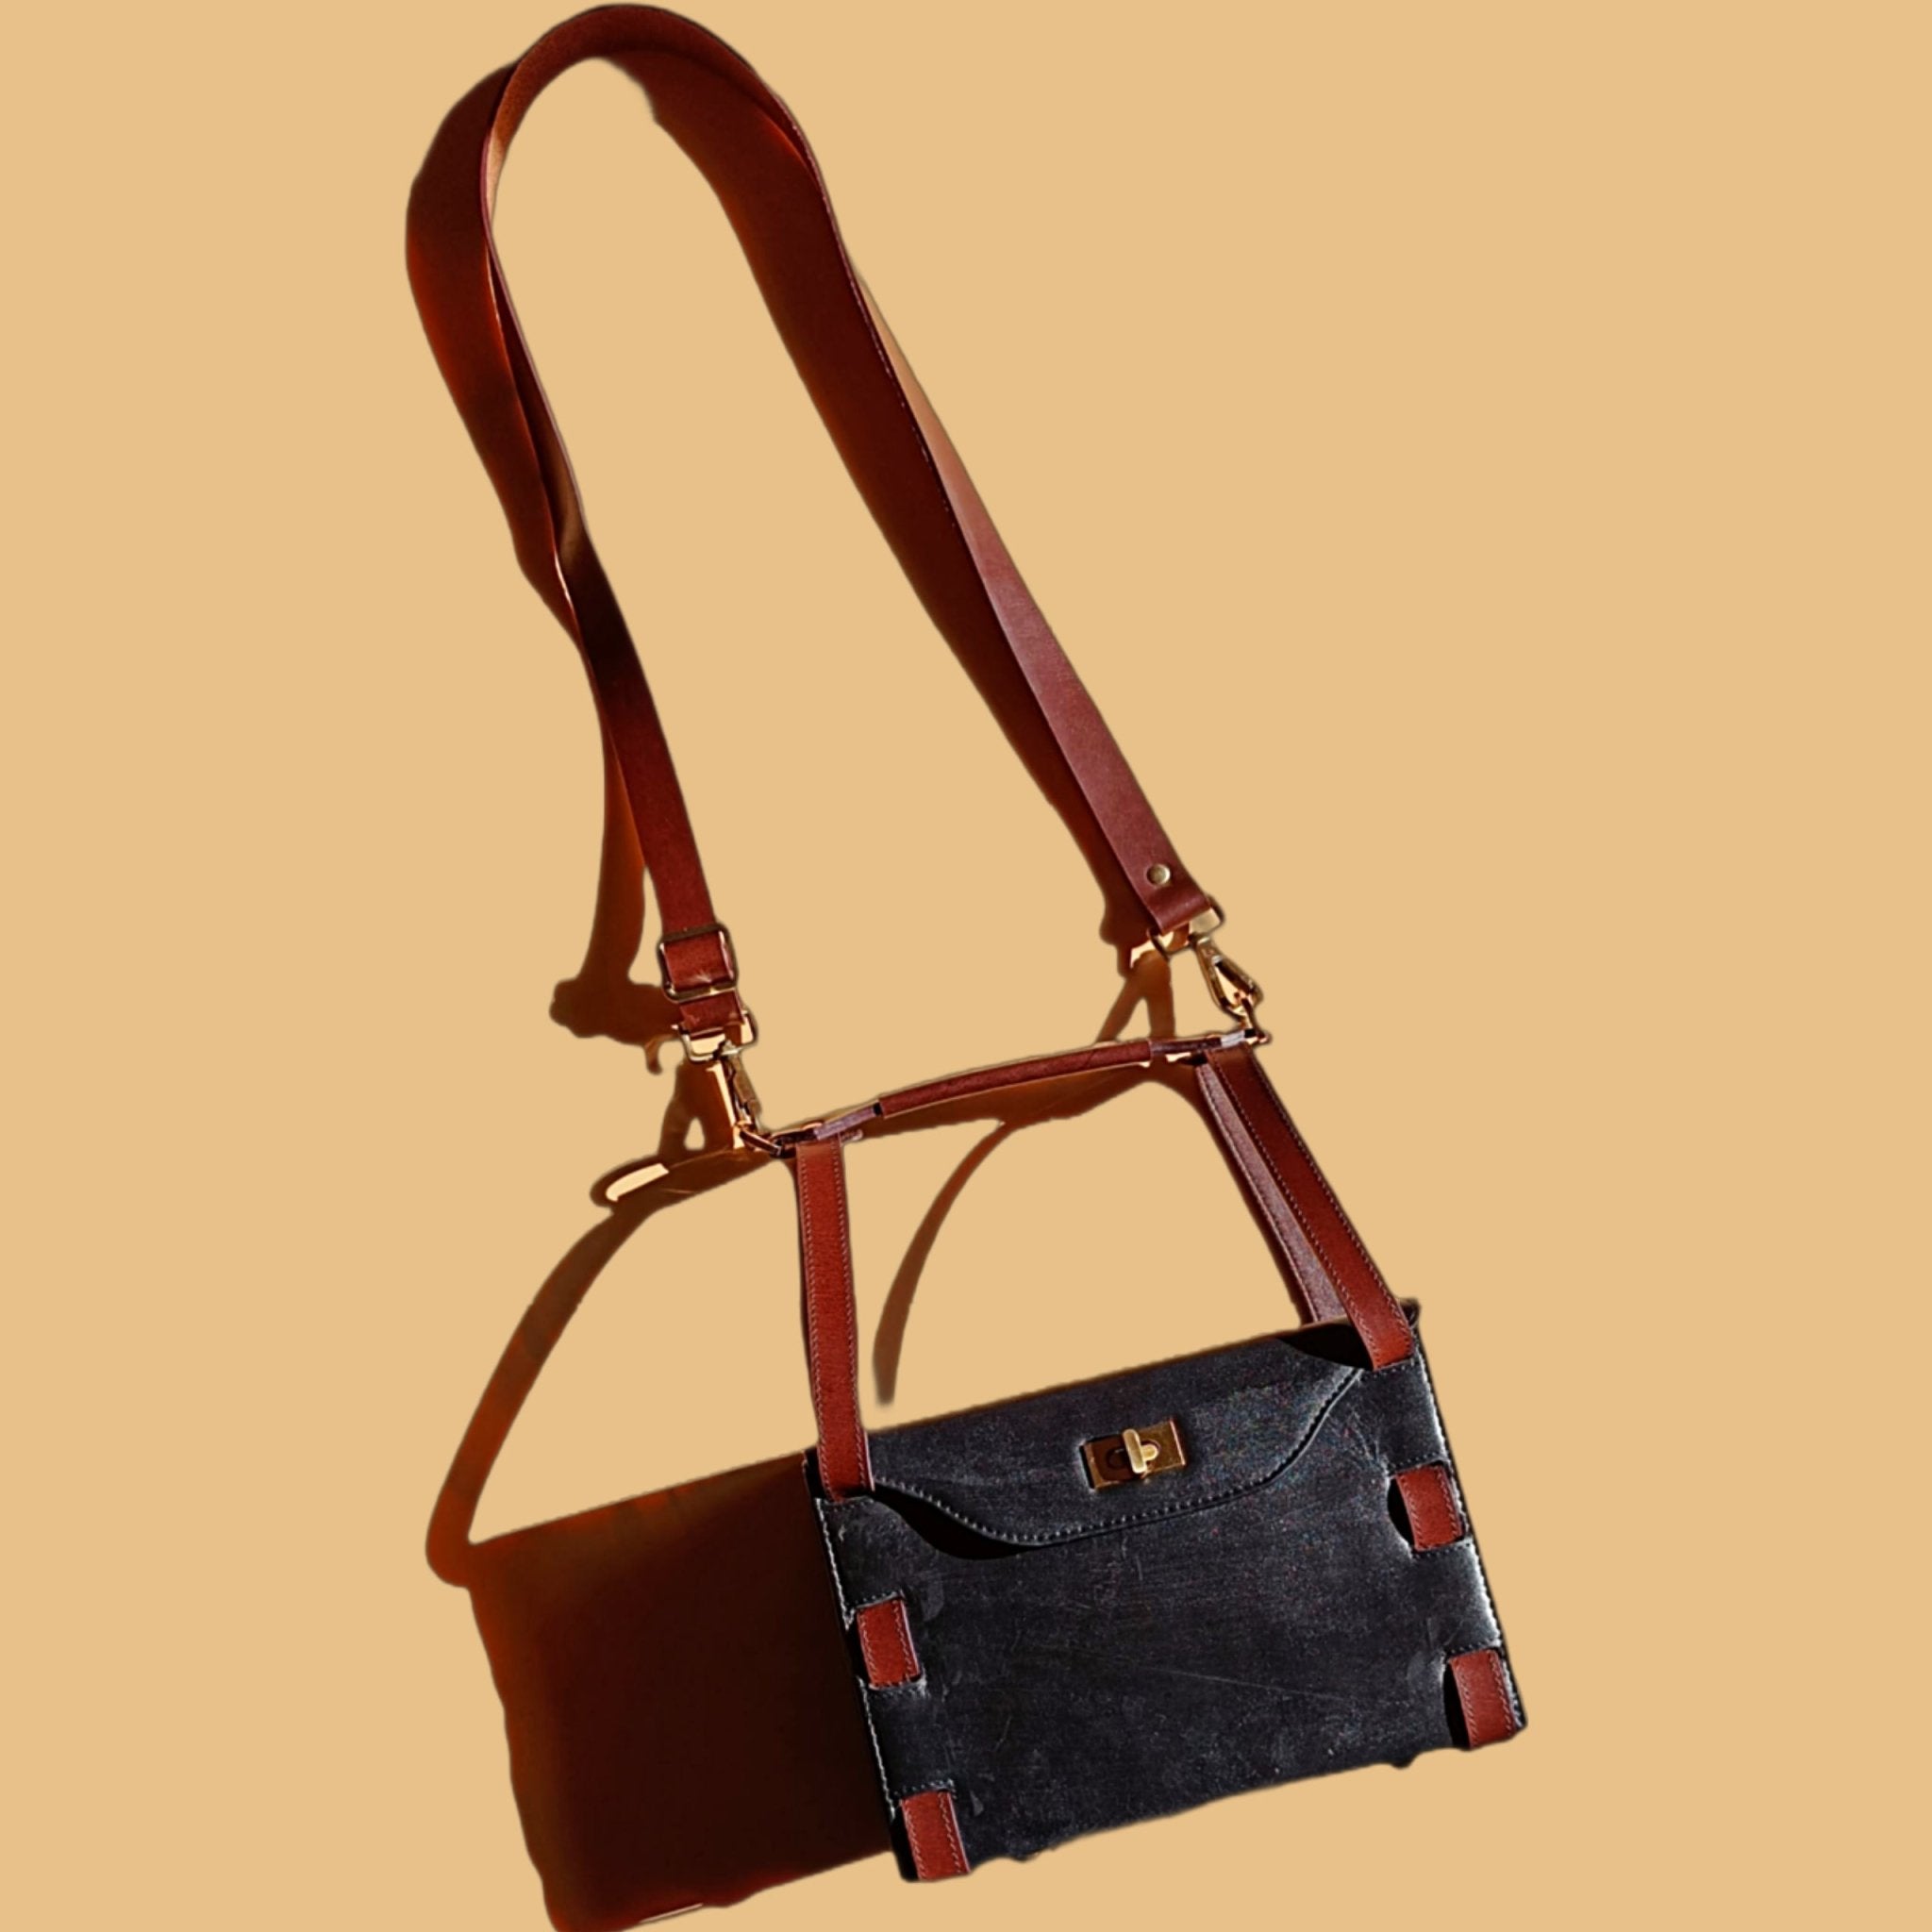 Buy BLACK PU LEATHER DOUBLE-STRAP HANDBAG for Women Online in India